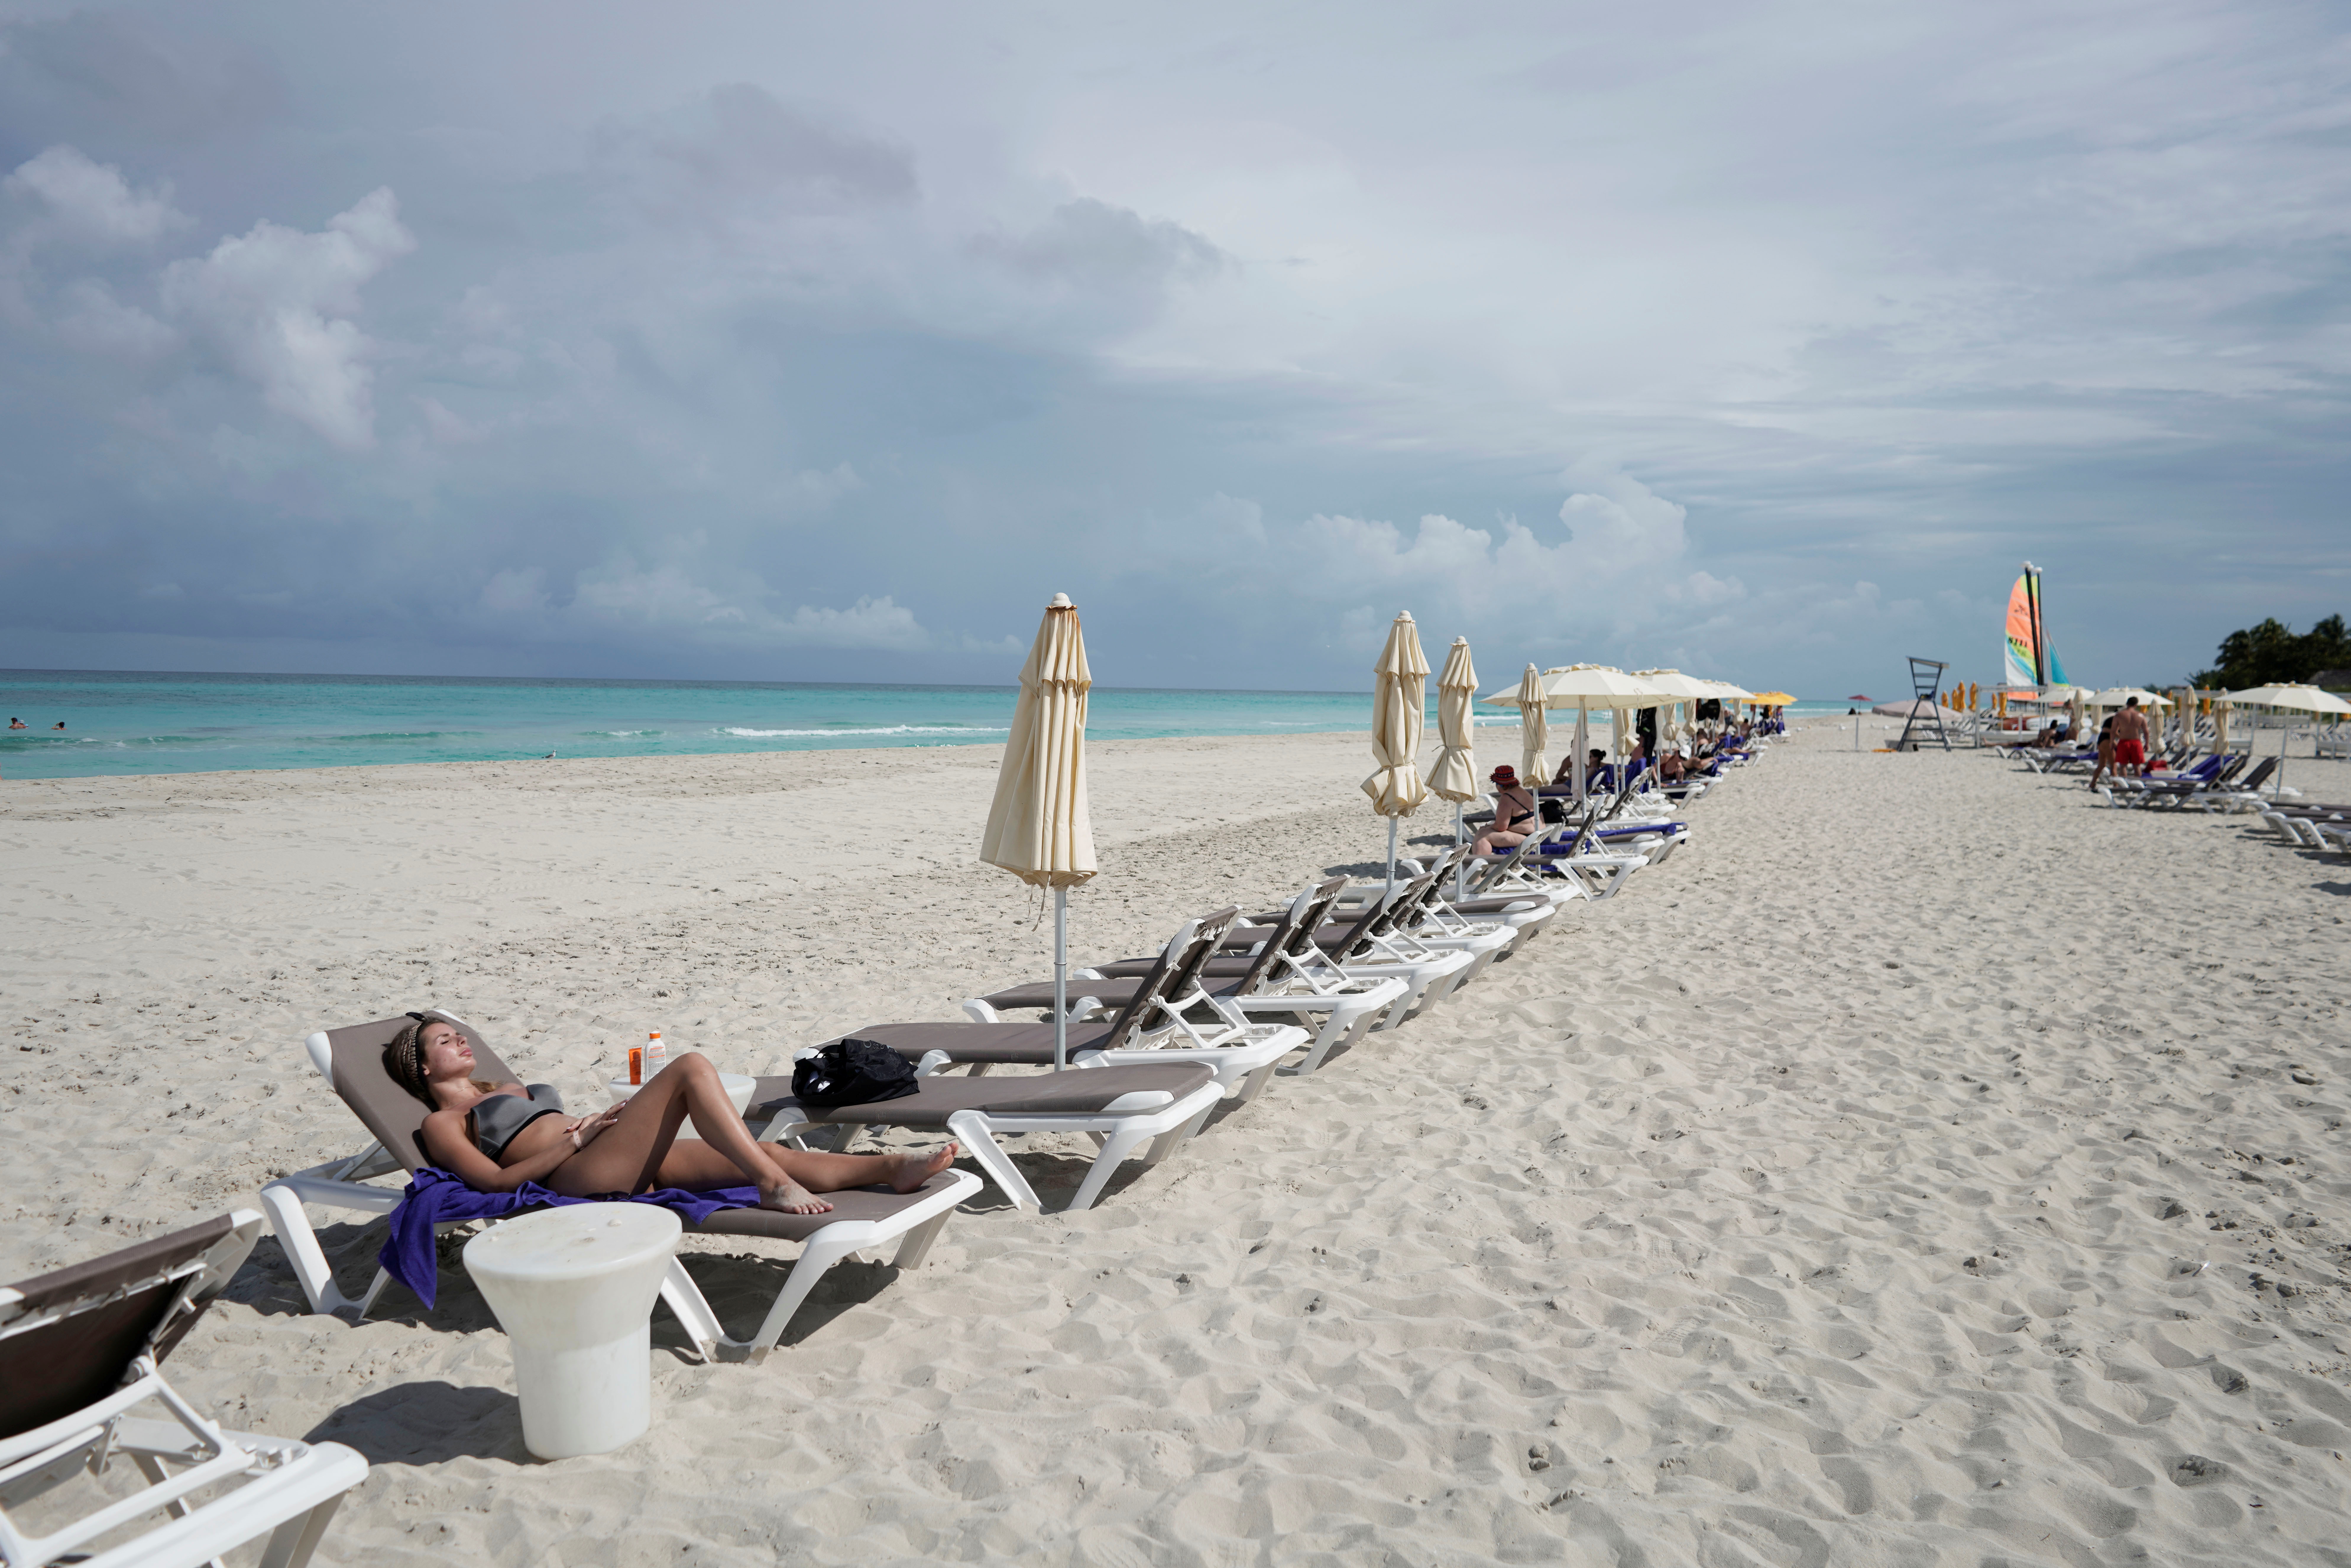 A tourist sunbathes amid concerns about the spread of the coronavirus disease (COVID-19) in Varadero, Cuba, October 22, 2021. Picture taken on October 22, 2021. REUTERS/Alexandre Meneghini